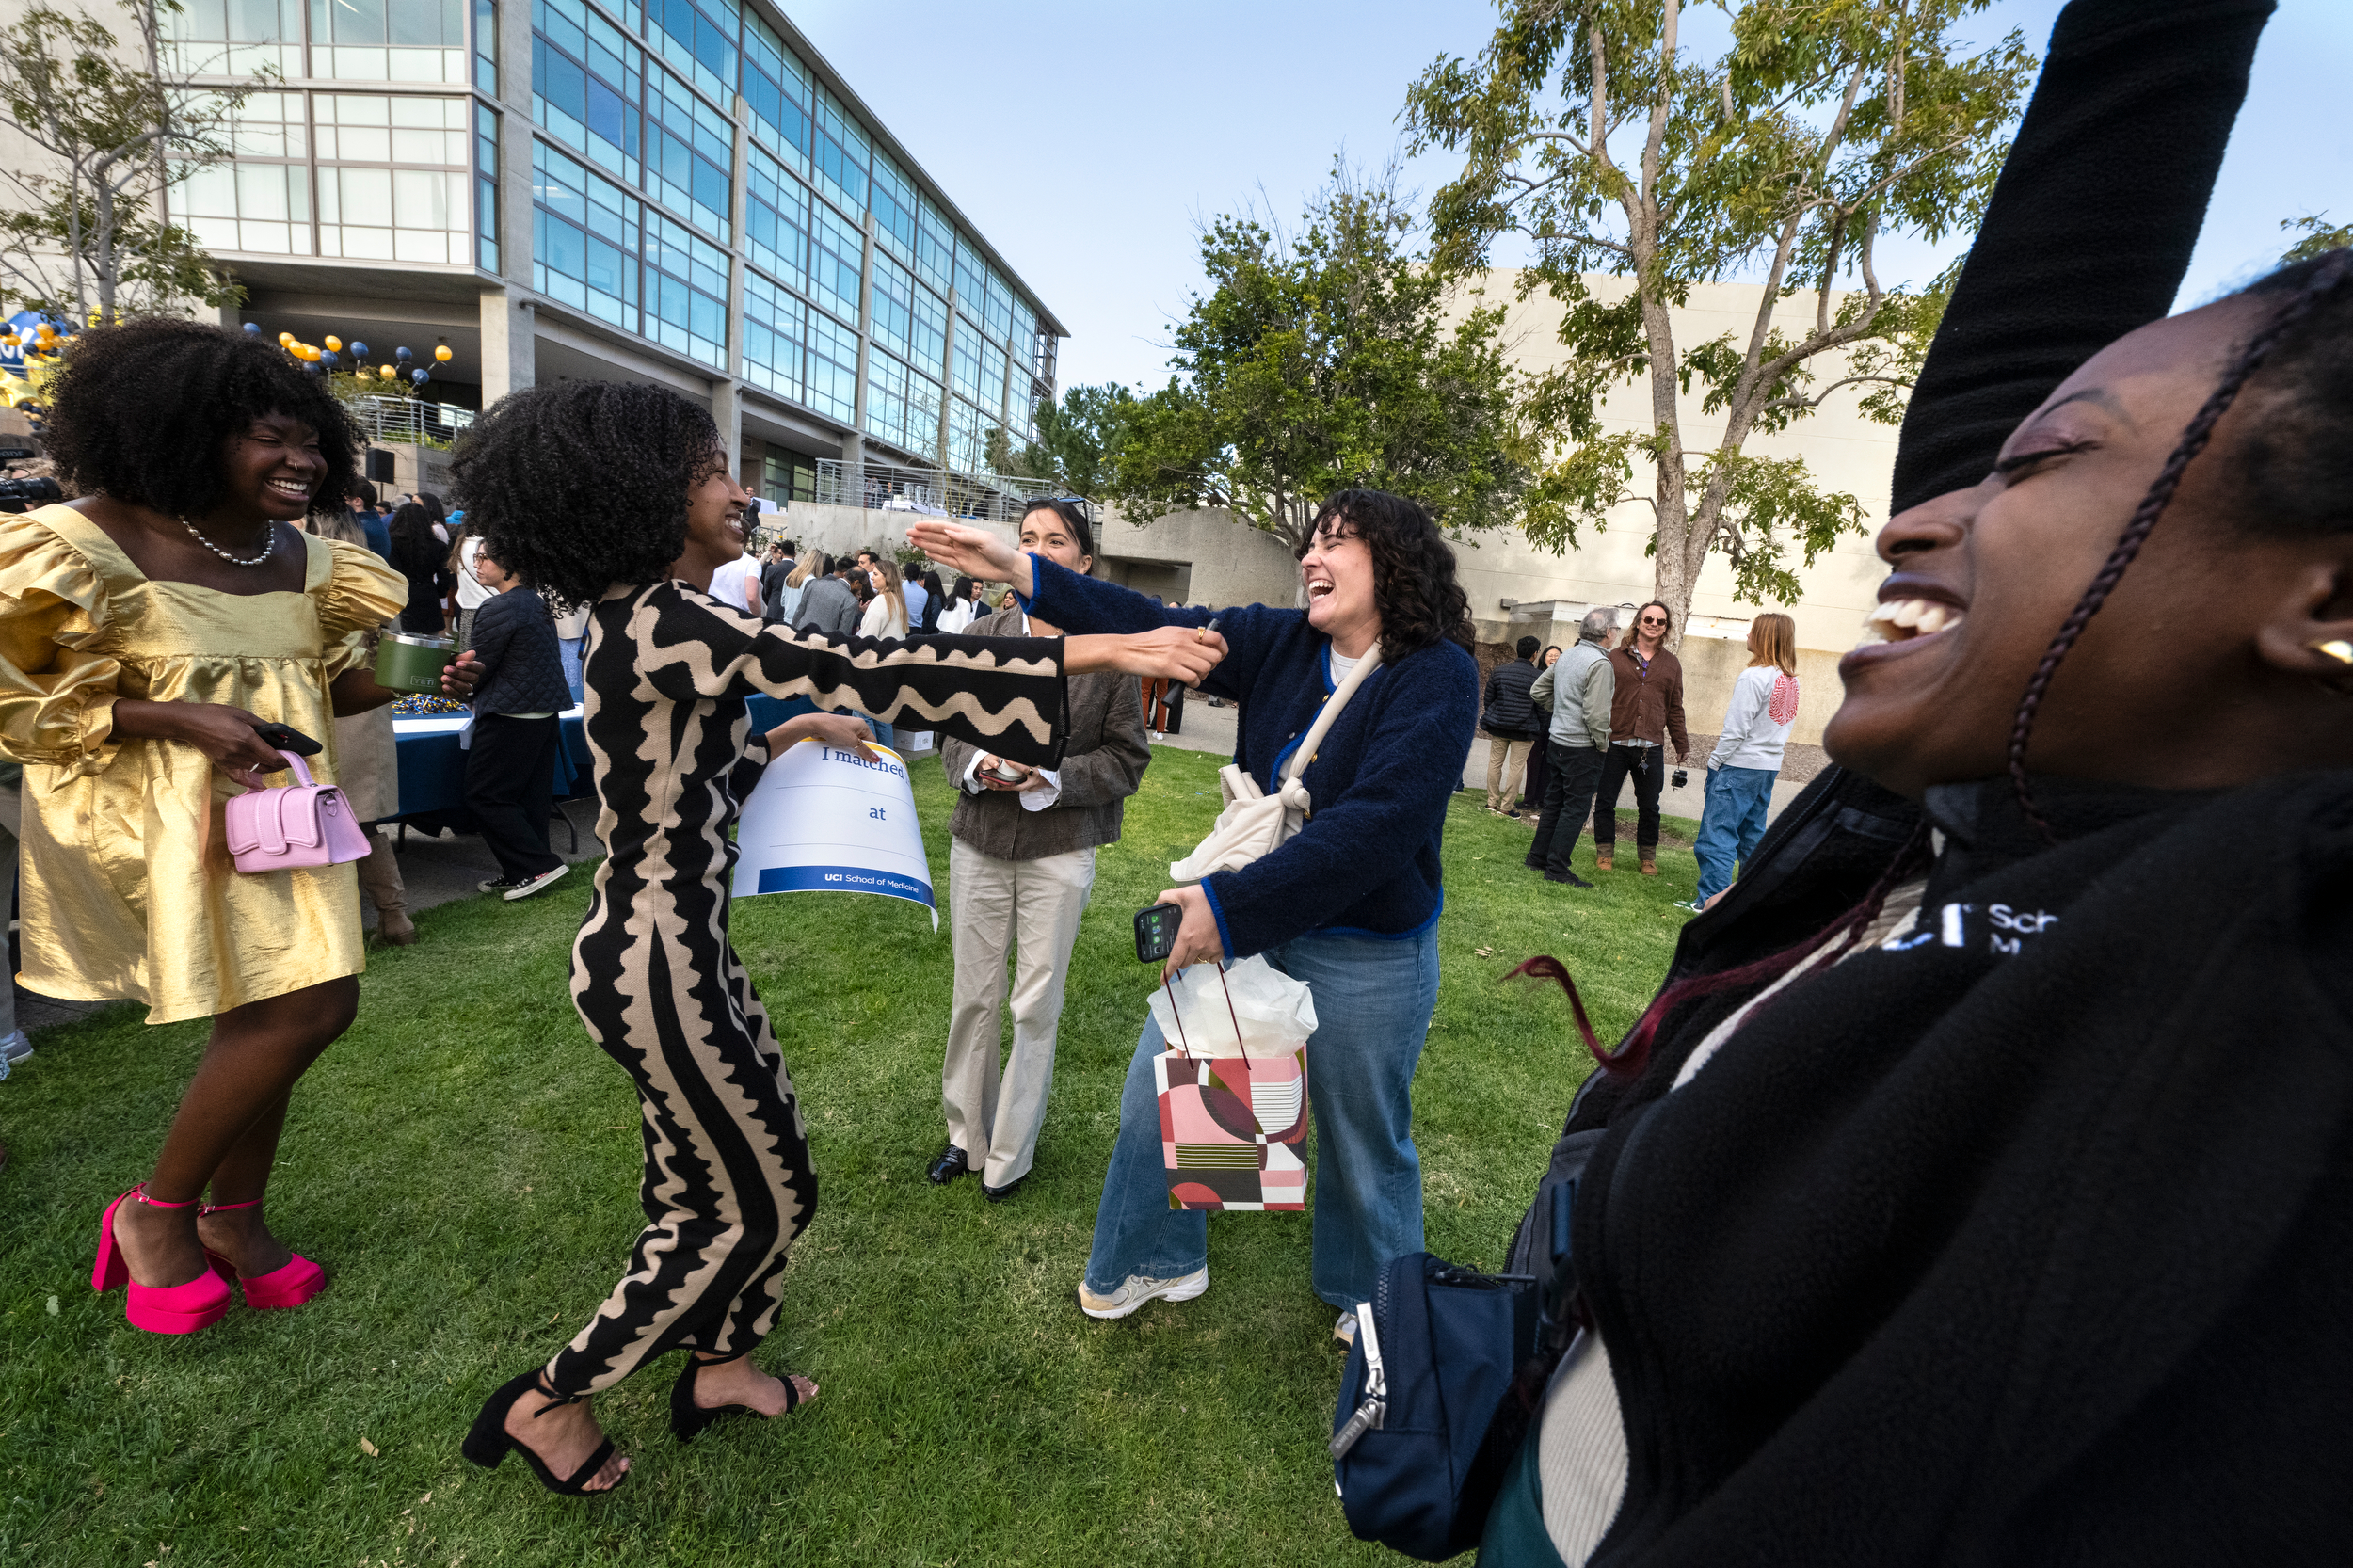 At the Match Day event, Clare Dasilva (left, in gold dress) and Gabby Rodriguez (right, in blue sweater) celebrate with graduating UCI medical student Betty Tesfaye (center), who will be going to New York University for a residency in pediatrics.